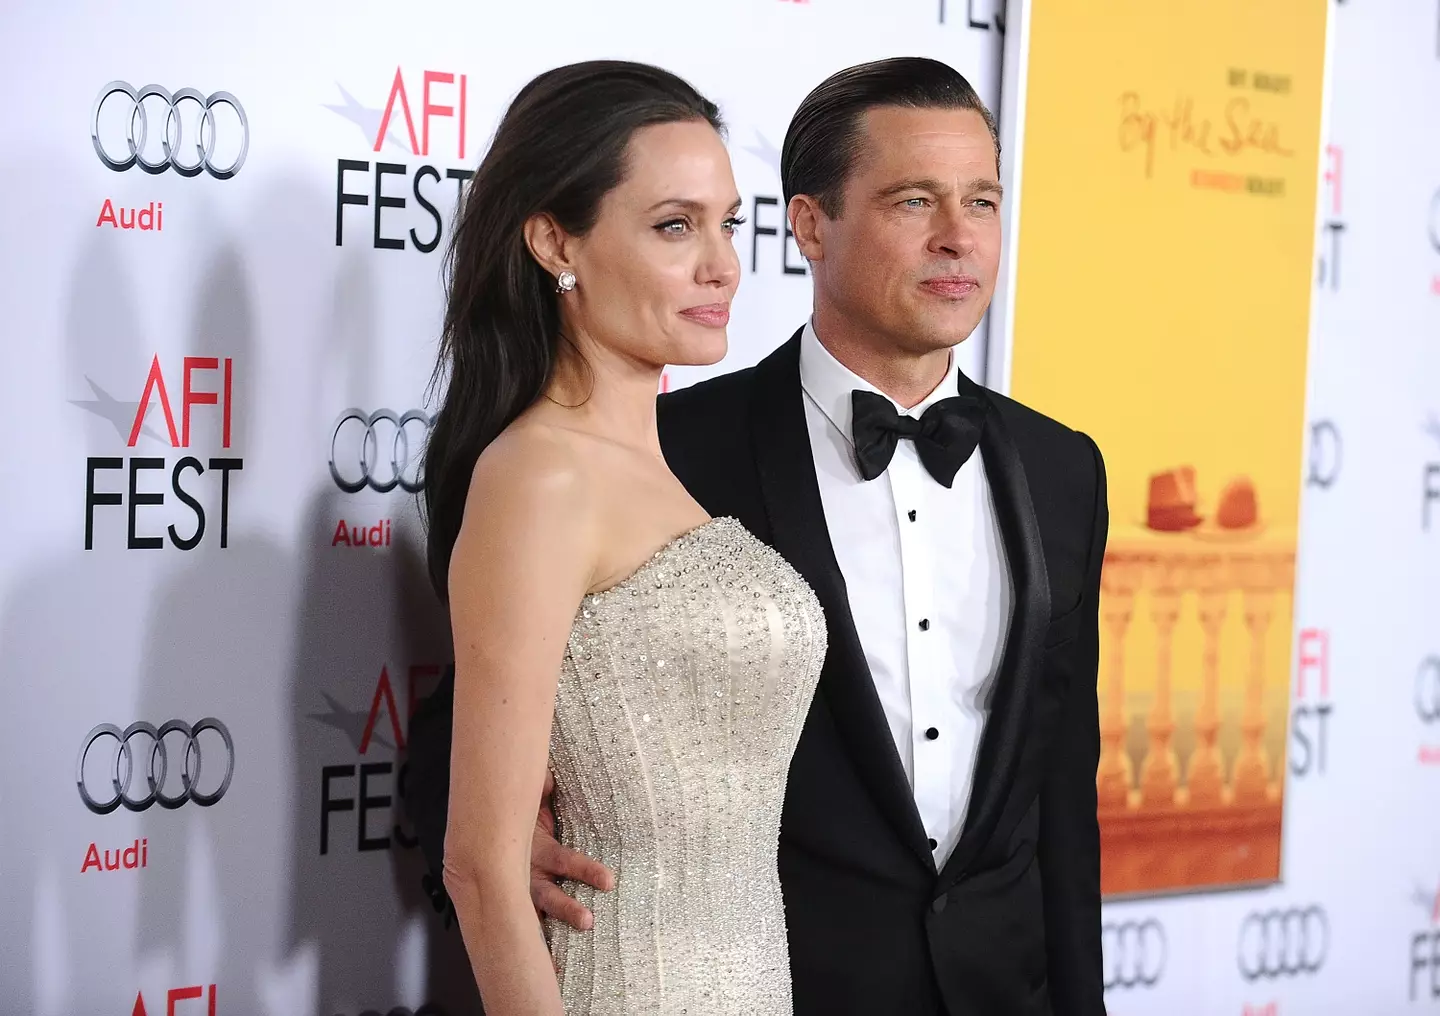 Angelina Jolie filed for divorce from Brad Pitt in 2016.